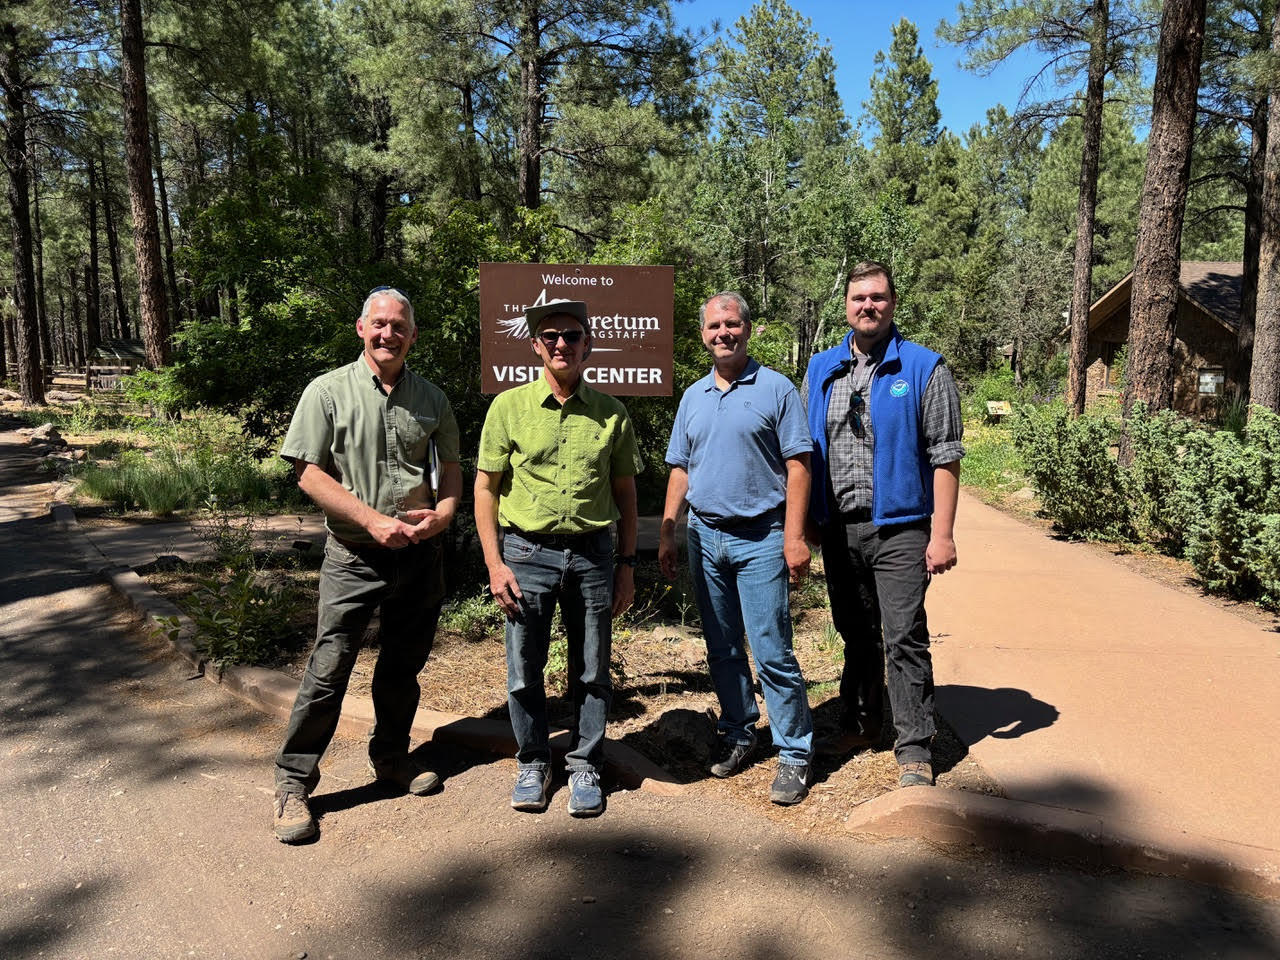 Scientists survey a possible observation site near Flagstaff, Arizona for fire weather. Photo shows four men on a dirt road in a forest of pine trees.